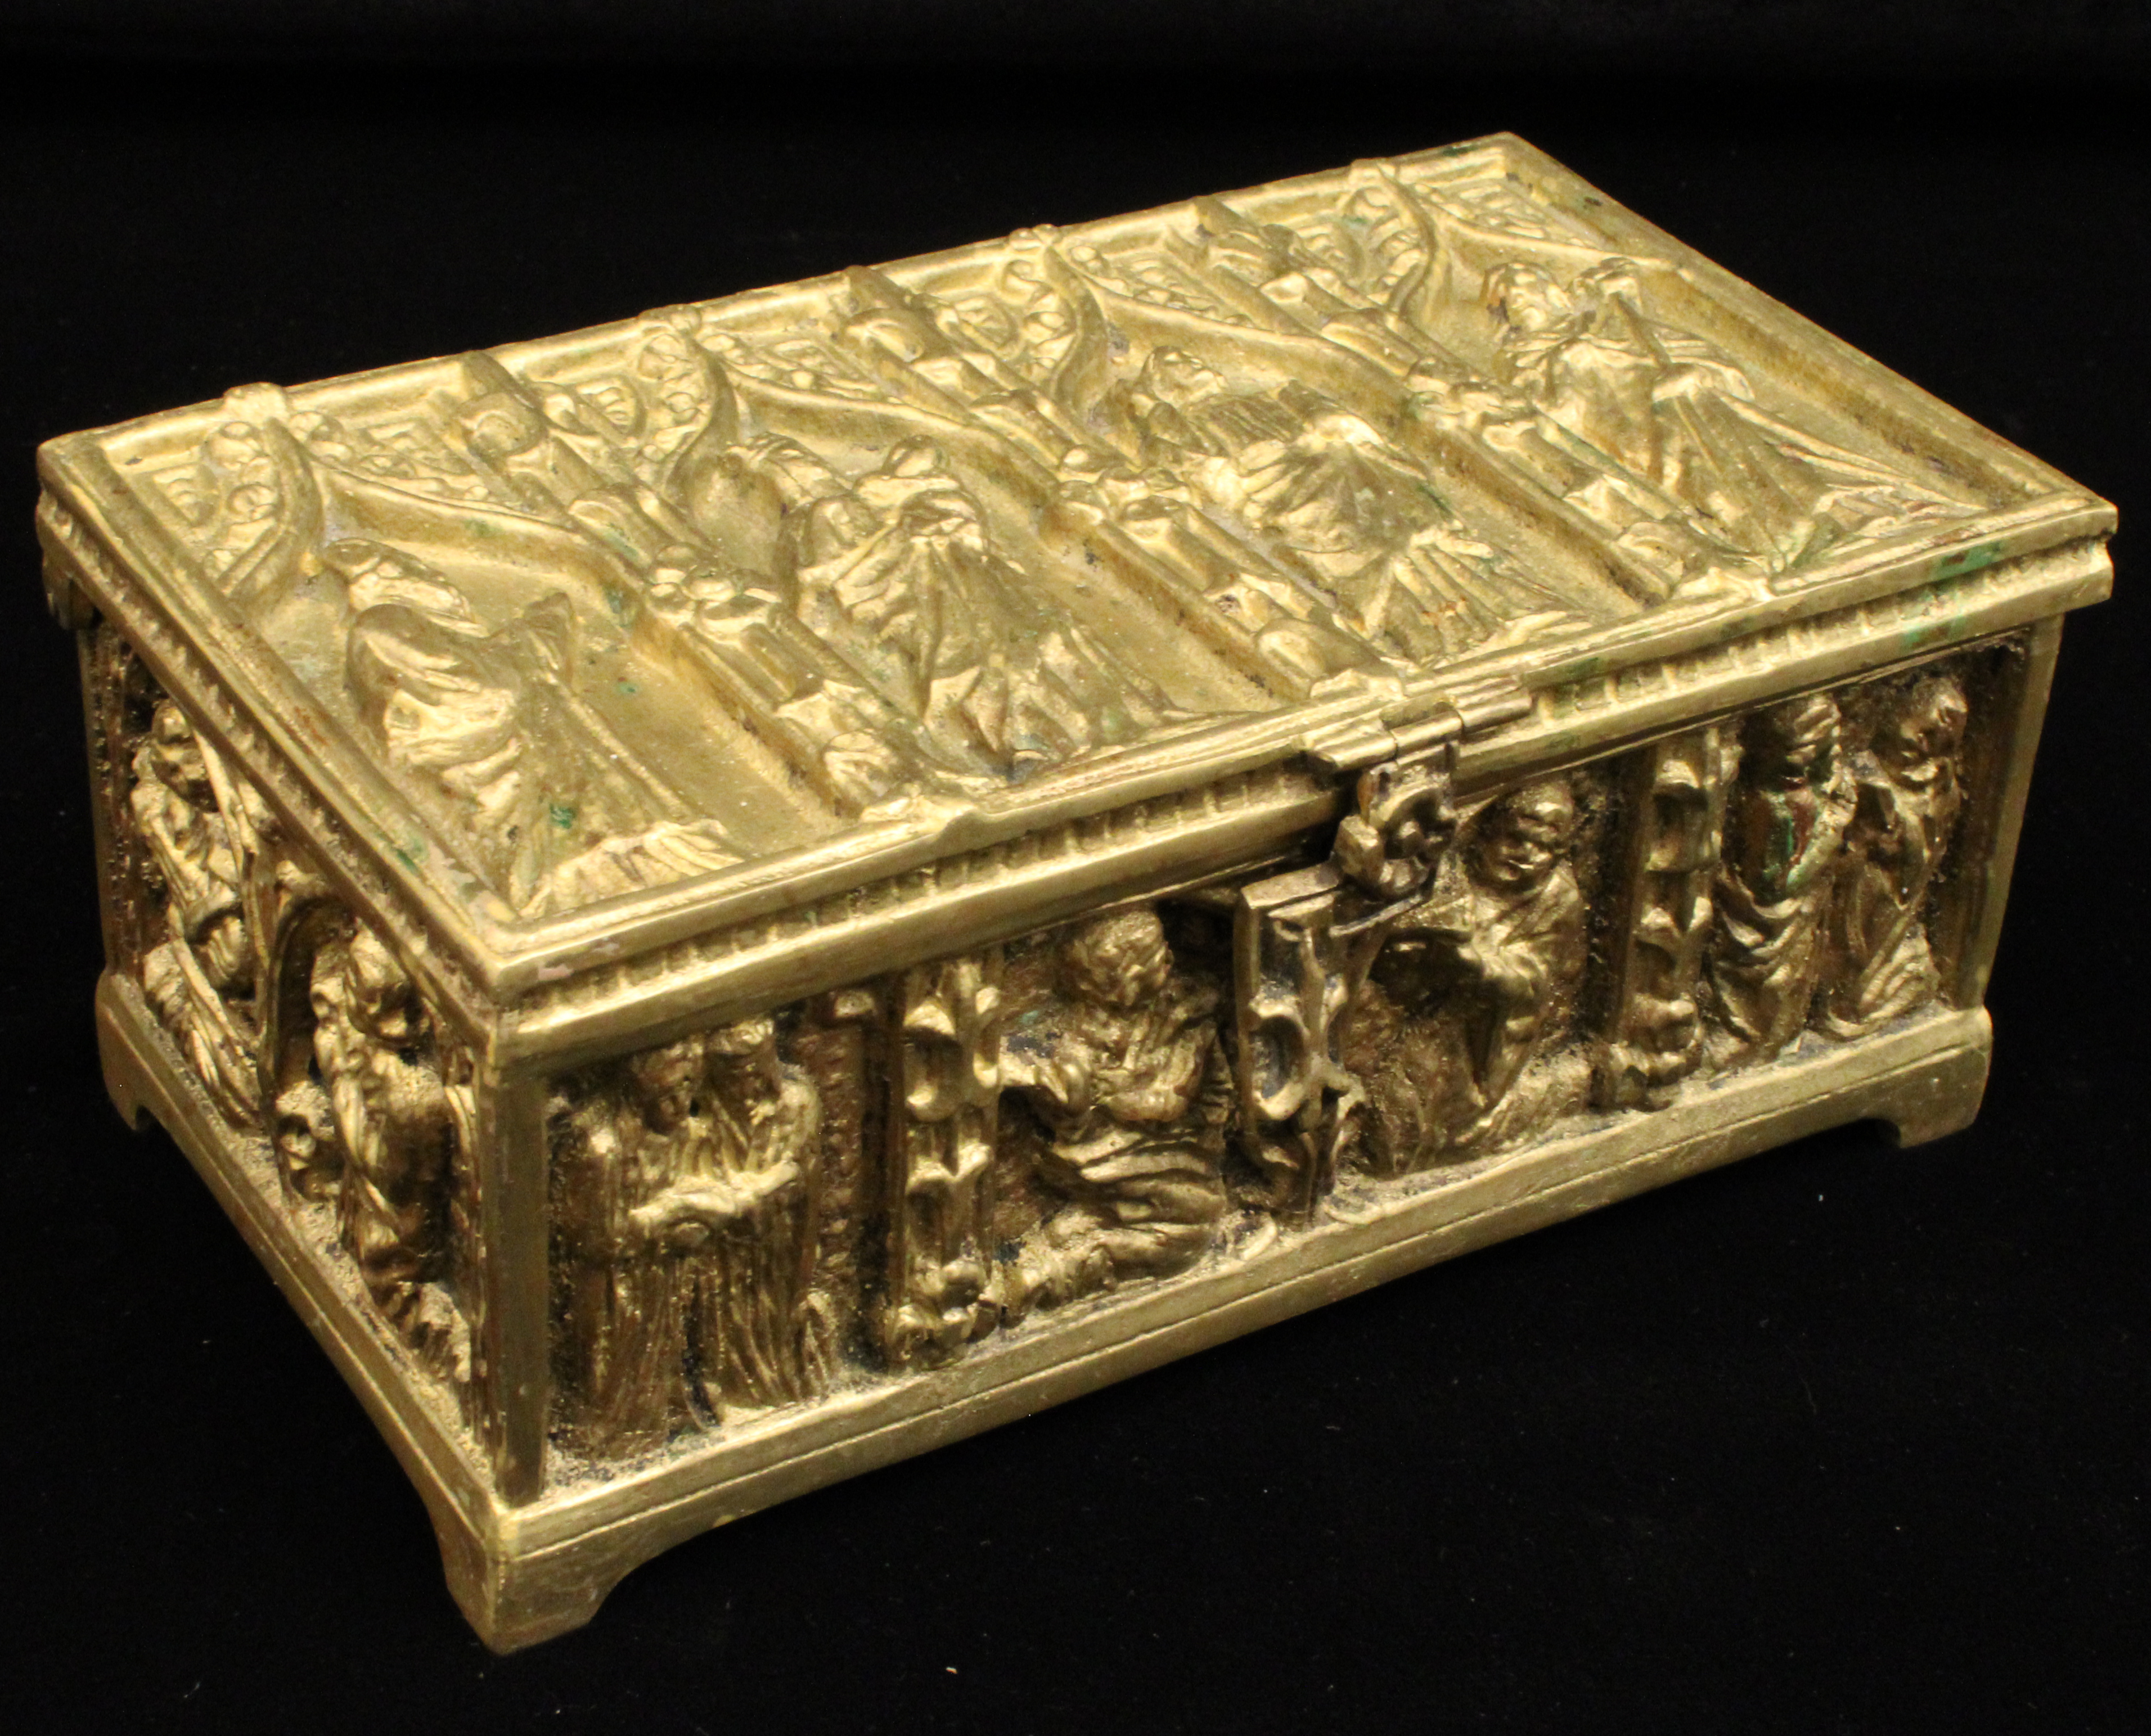 HINGED TOP BRONZE CASKET WITH VARIOUS